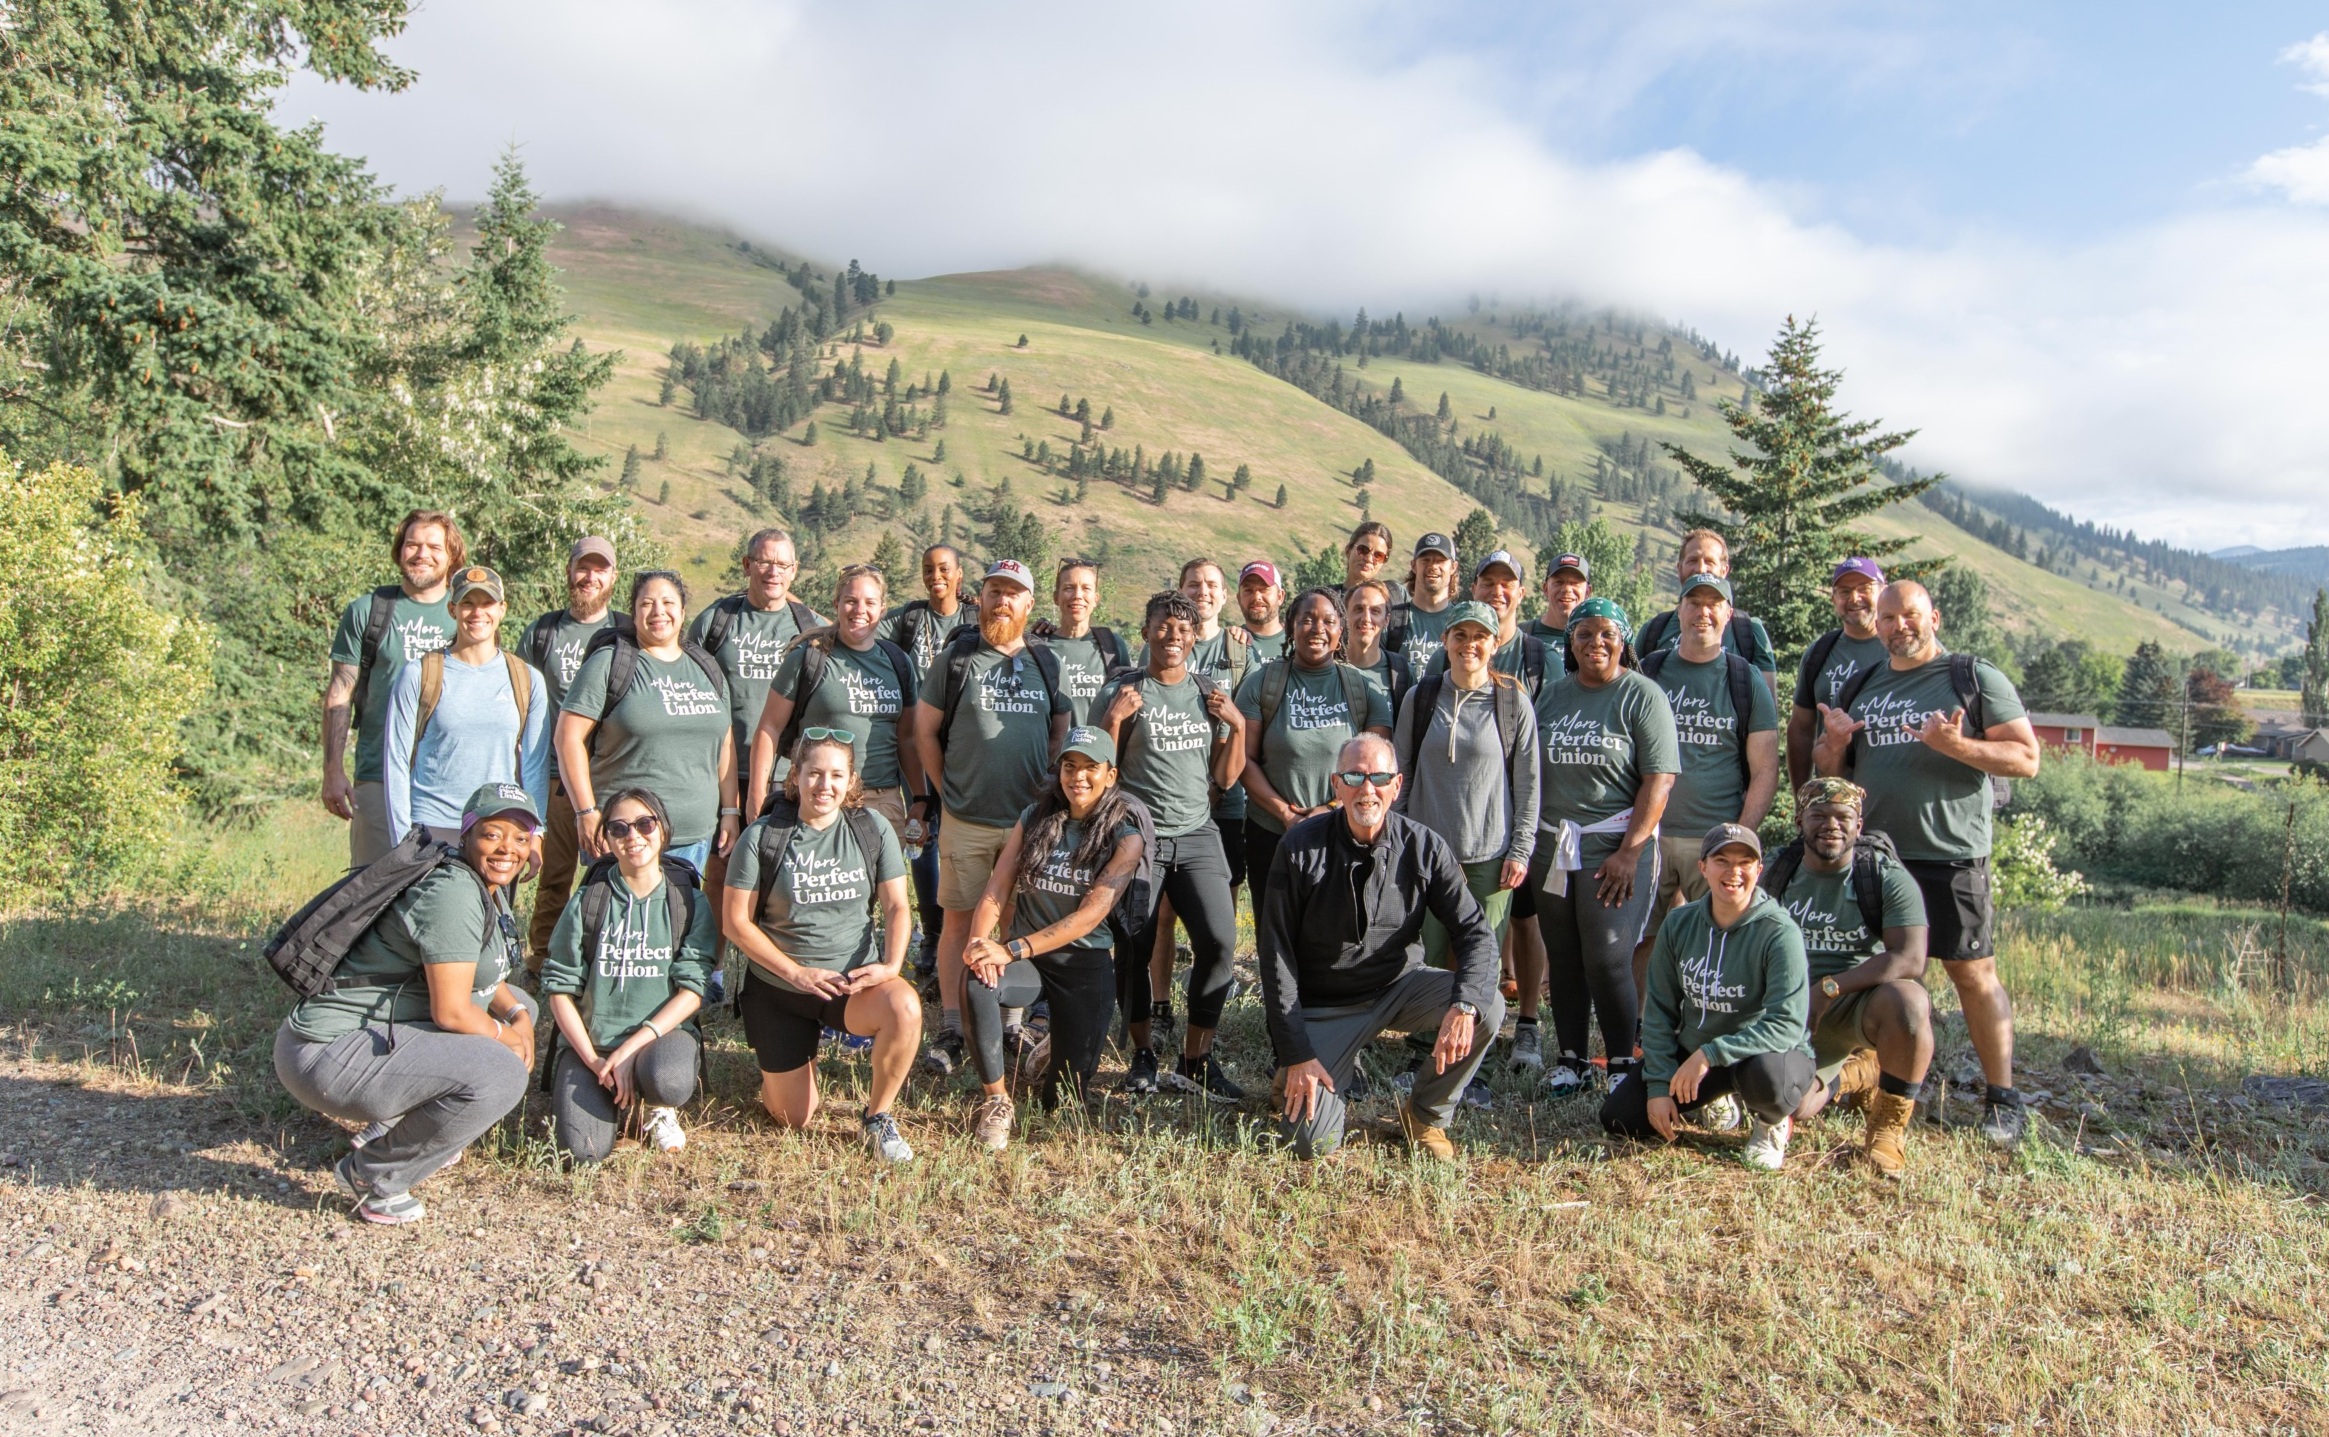 Group of 30 Americans of different backgrounds hiking in Montana wearing MPU tshirts.